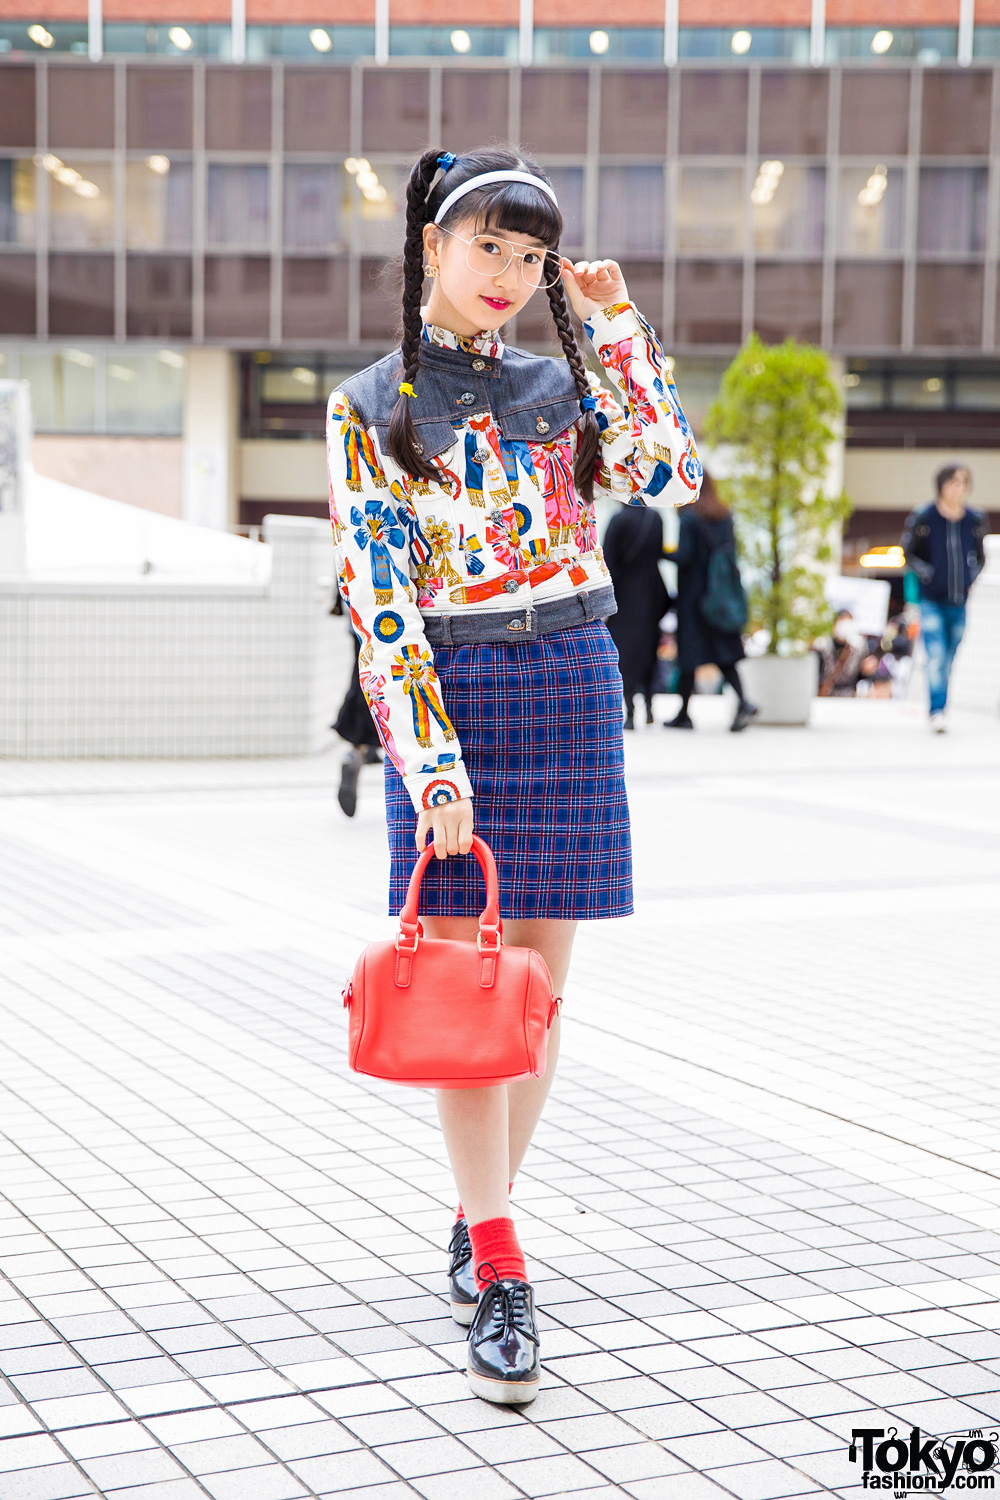 Japanese Model/Actress A-Pon in Vintage Mixed Prints Street Style & Chanel  Earrings – Tokyo Fashion